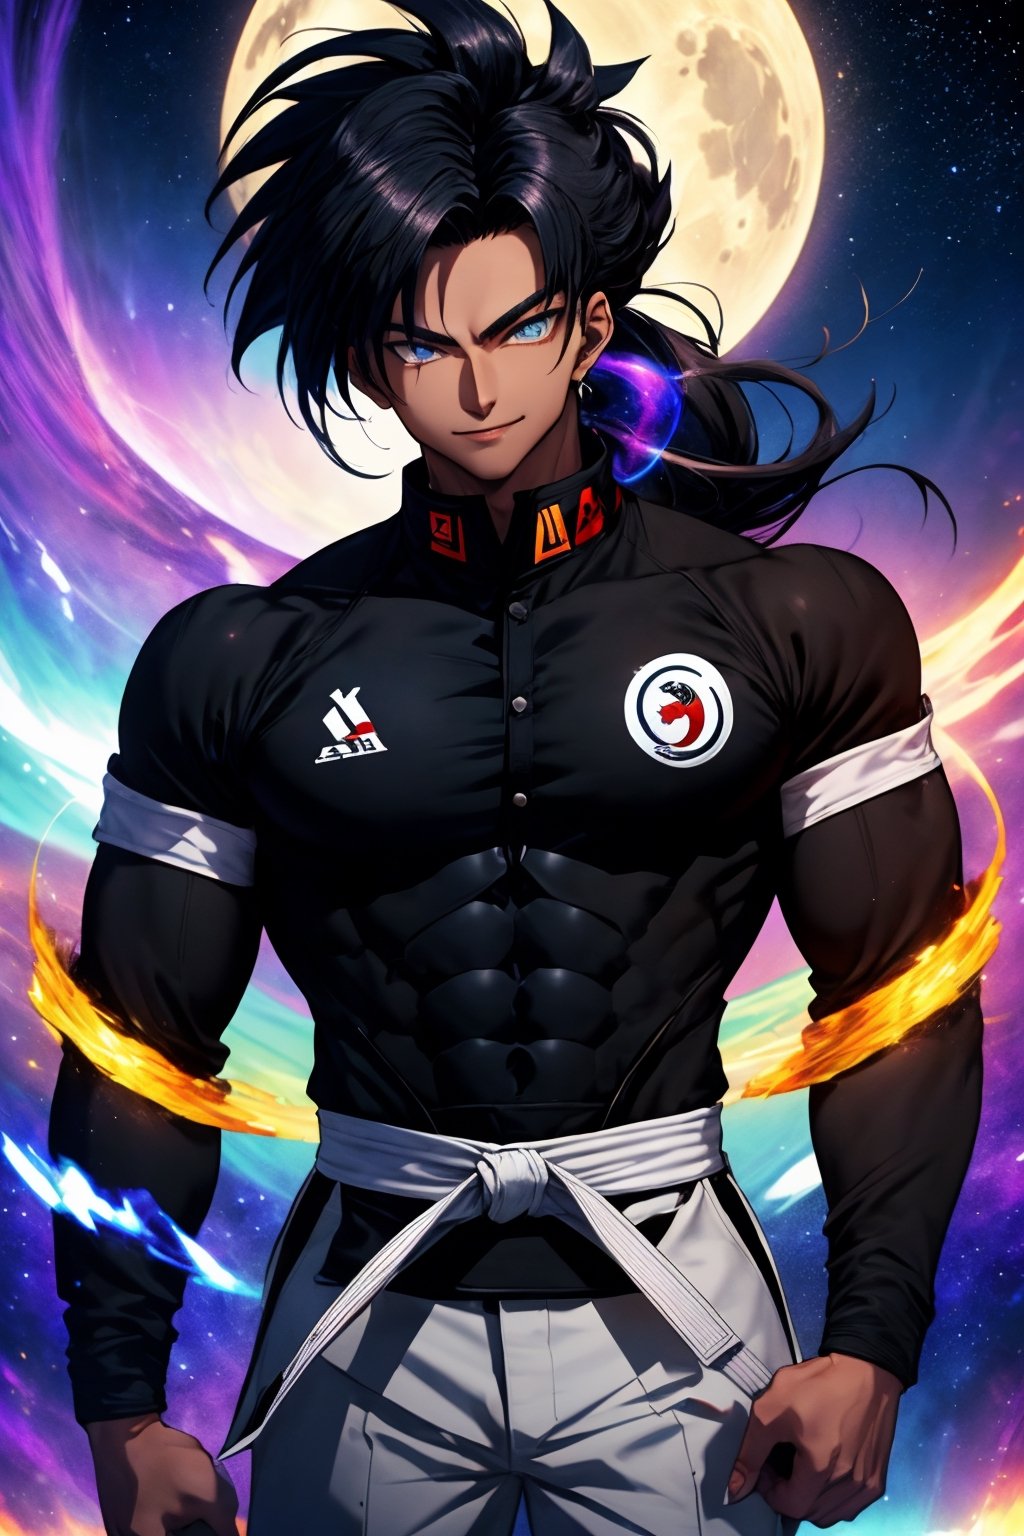 
Highly detailed.High Quality.Masterpiece. Beaitiful (médium long shot).

Young man, 25 years old, brown skin, tall and with a great physique (muscular), with an appearance similar to Tohru's (if he were a man). She has jet black hair (crezpo) tied in a (very small) ponytail, and has messy bangs with a purple gradient to the side strands. He has large, slightly slanted, light blue eyes. He wears a light gray jacket with the Capsule Corporation logo on the left sleeve, a red belt (a taekwondo one). He wears a black tank top under his jacket and dark gray pants (very dark). He is alone, but with a happy smile on his face enjoying a beautiful night of moon and bright stars in the sky. In addition to having an aura around him that is mostly blue with violet details on the edges (an aura in the style of Saiyajin's divine transformations).